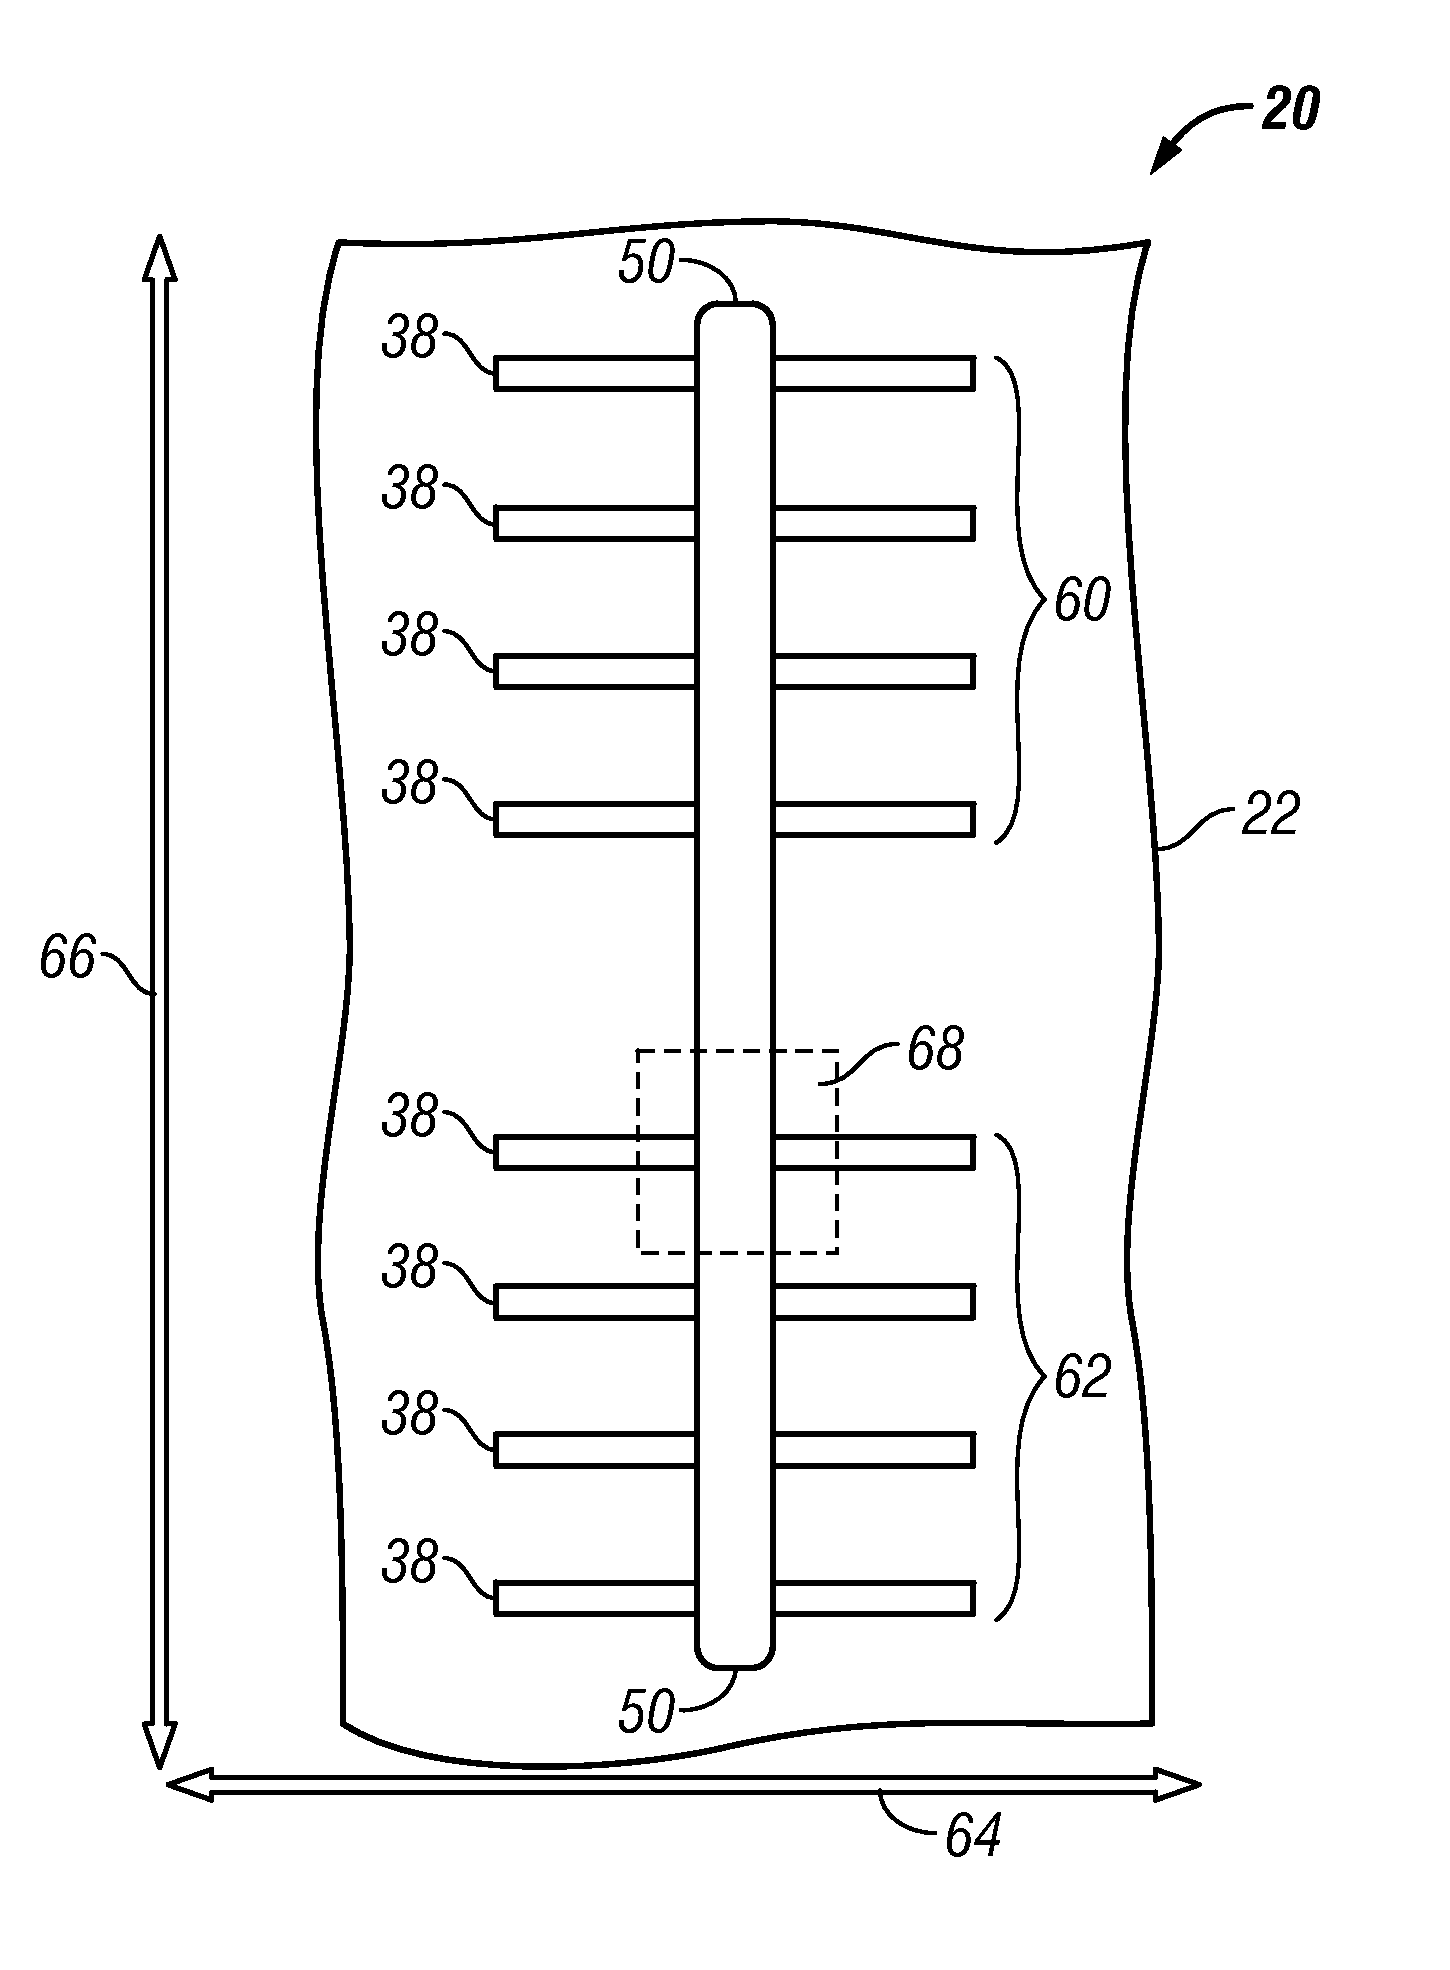 Methods for fabricating non-planar electronic devices having sidewall spacers formed adjacent selected surfaces